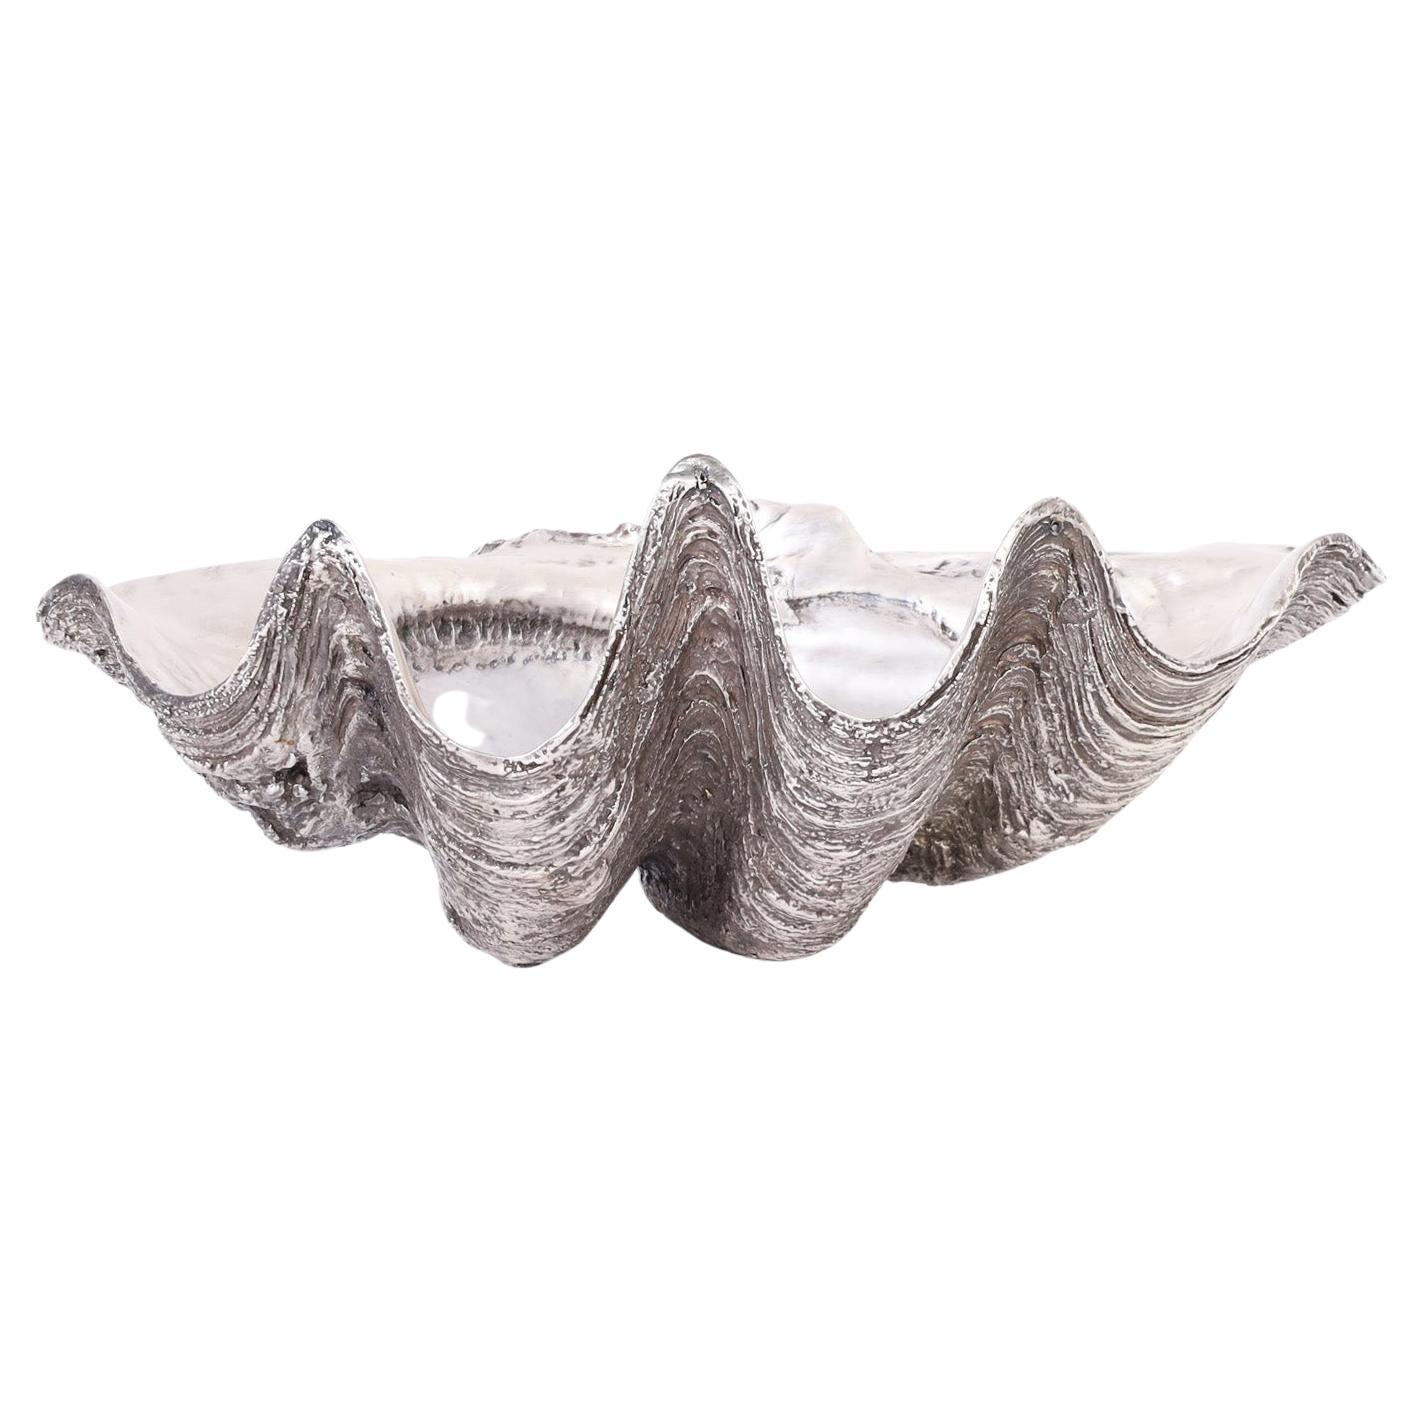 Silver Plate Life Size Giant Clam Shell Sculpture For Sale